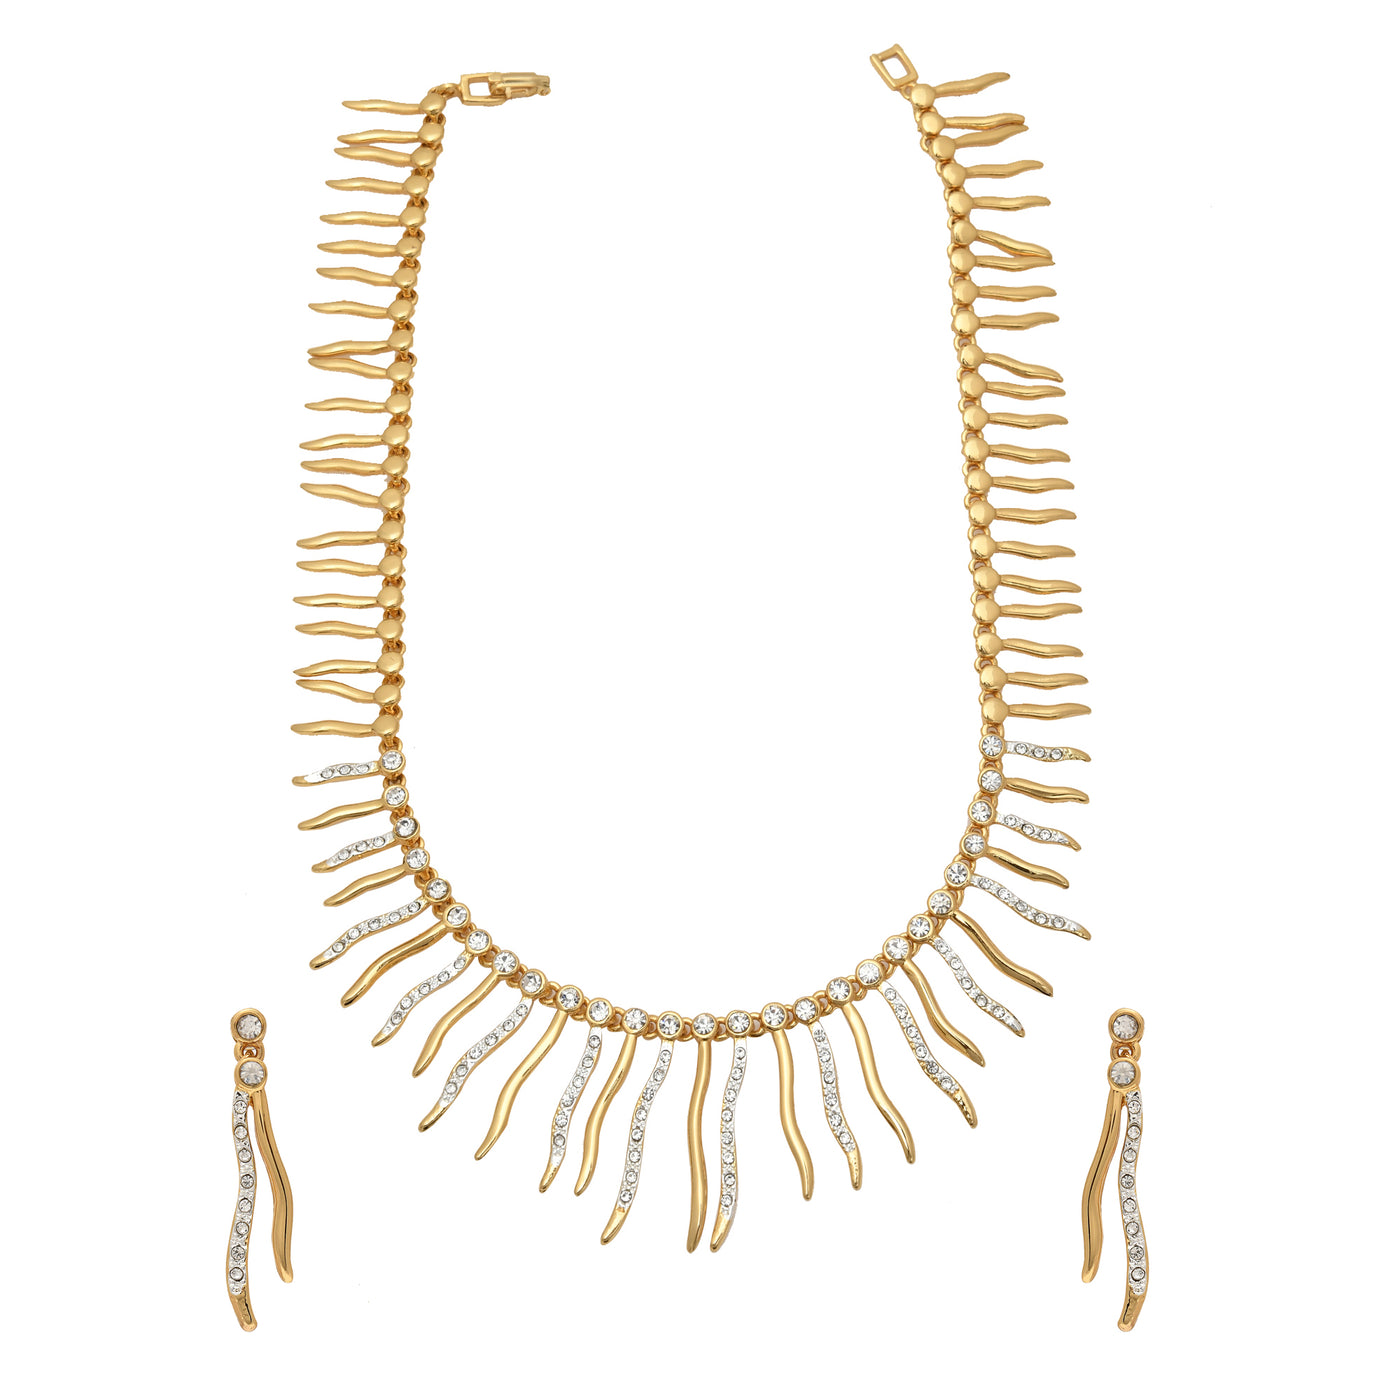 Stylish Gold and silver plated Dancing Light necklace